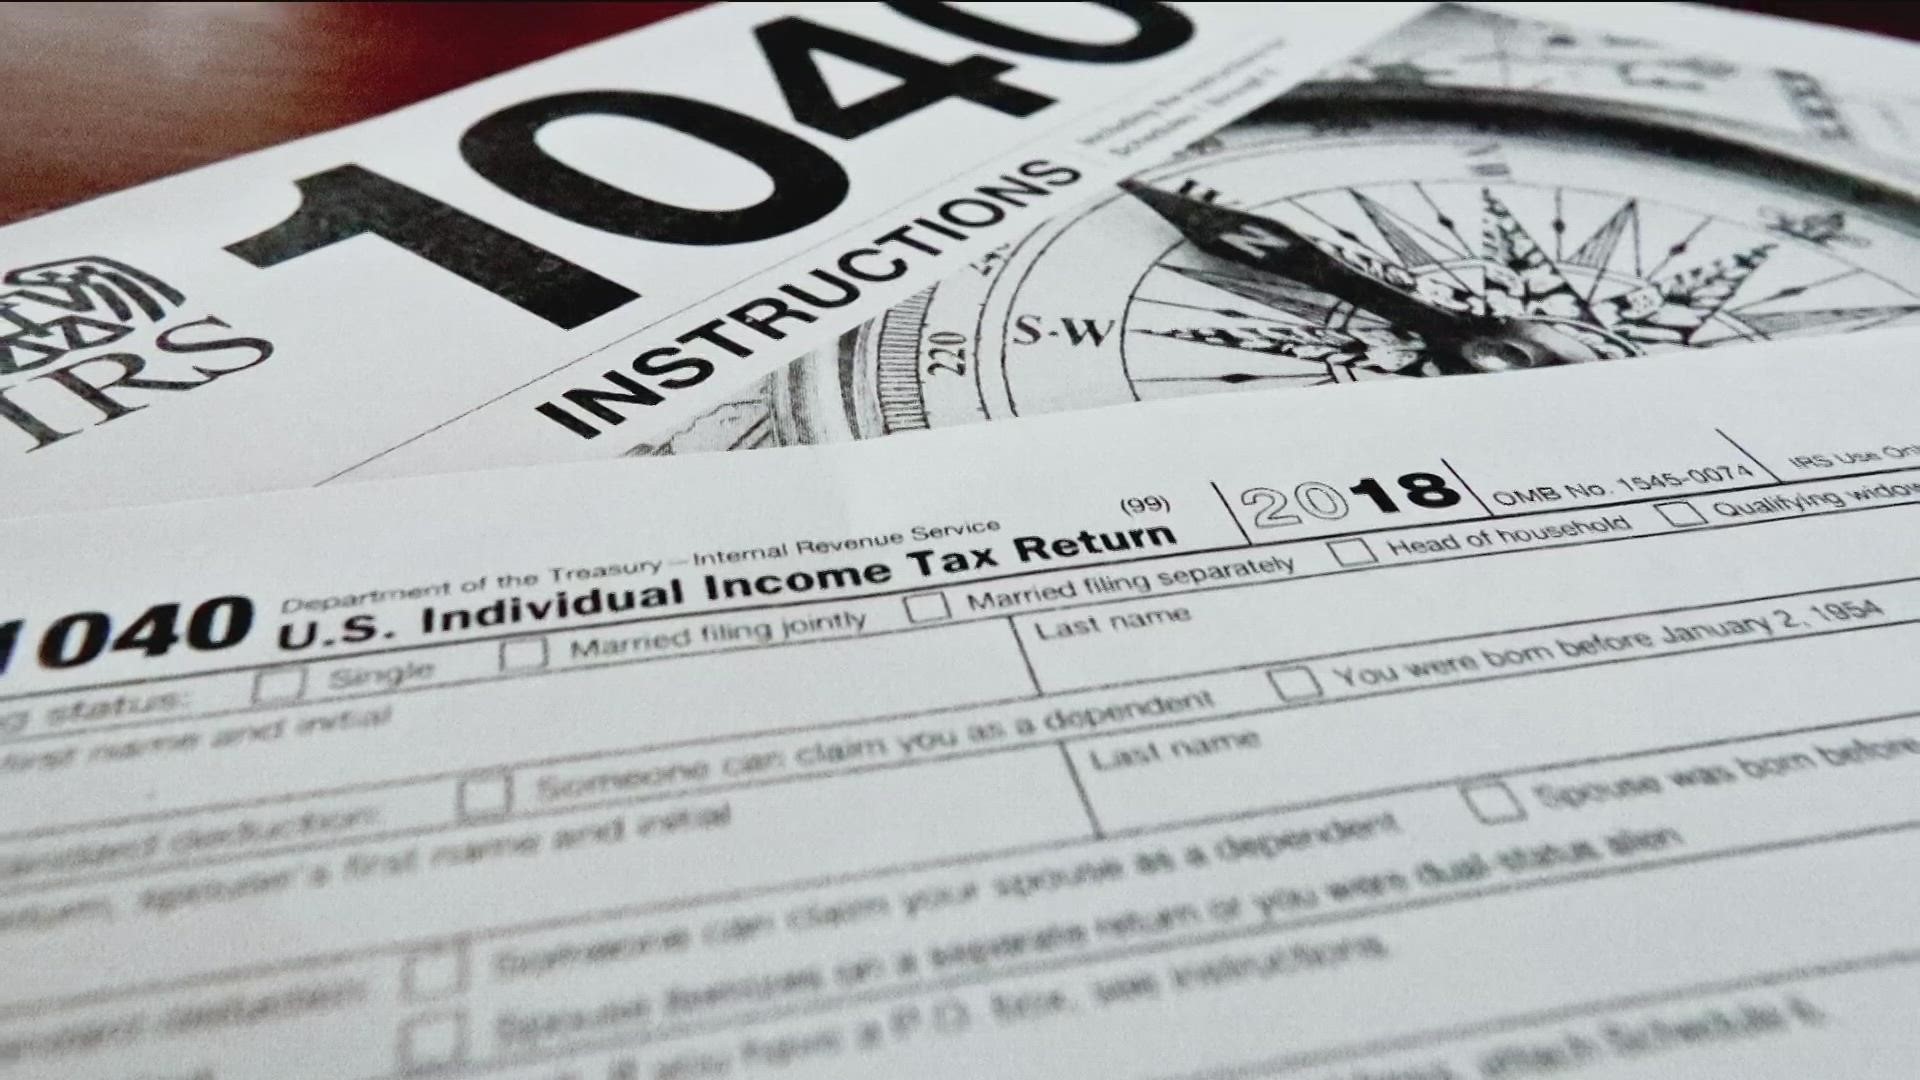 If you received a state tax refund last year, here is what you need to know.